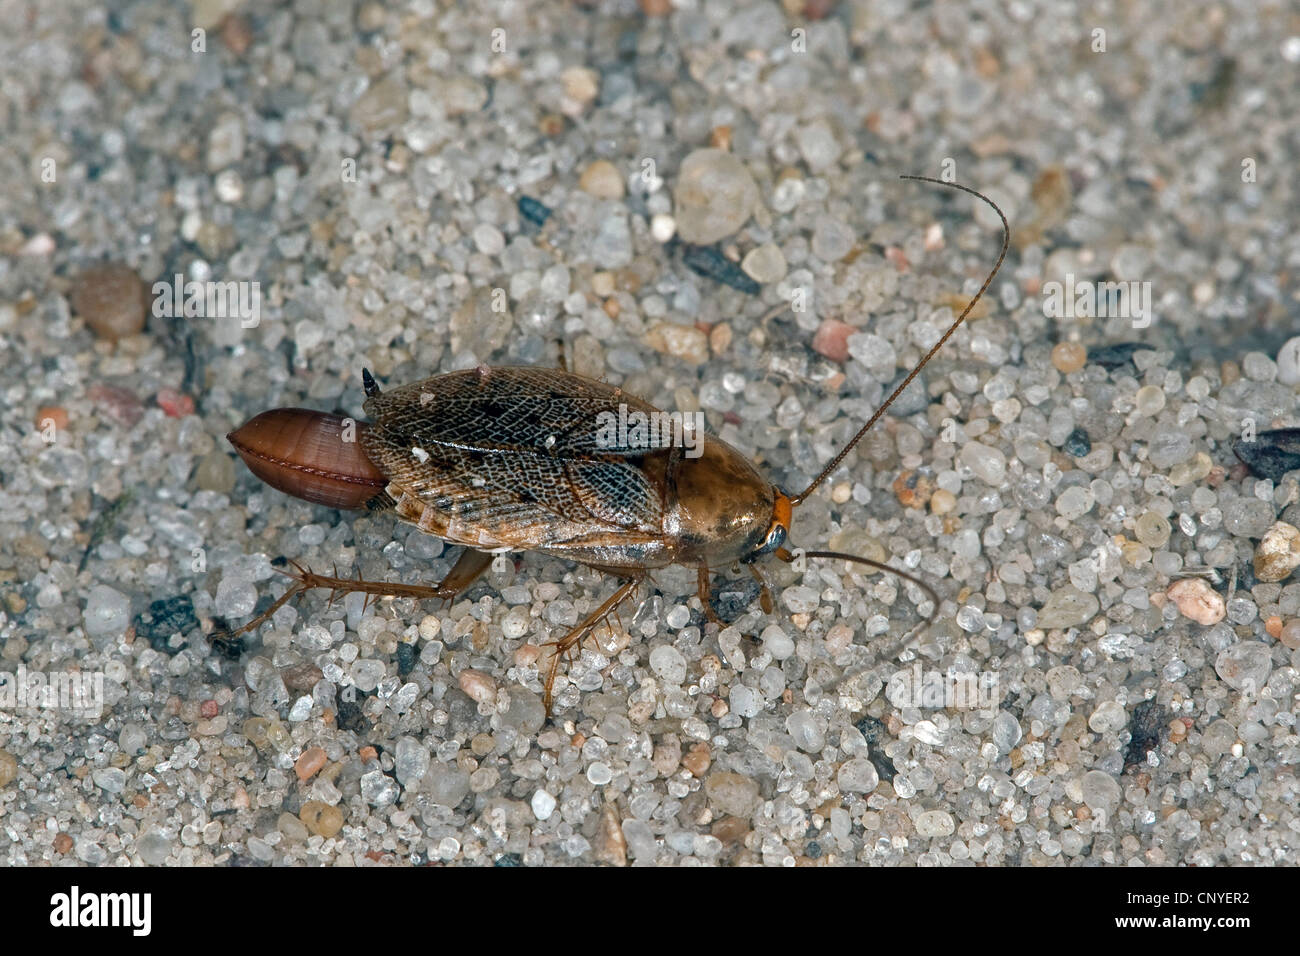 Ectobius Lapponicus High Resolution Stock Photography and Images - Alamy